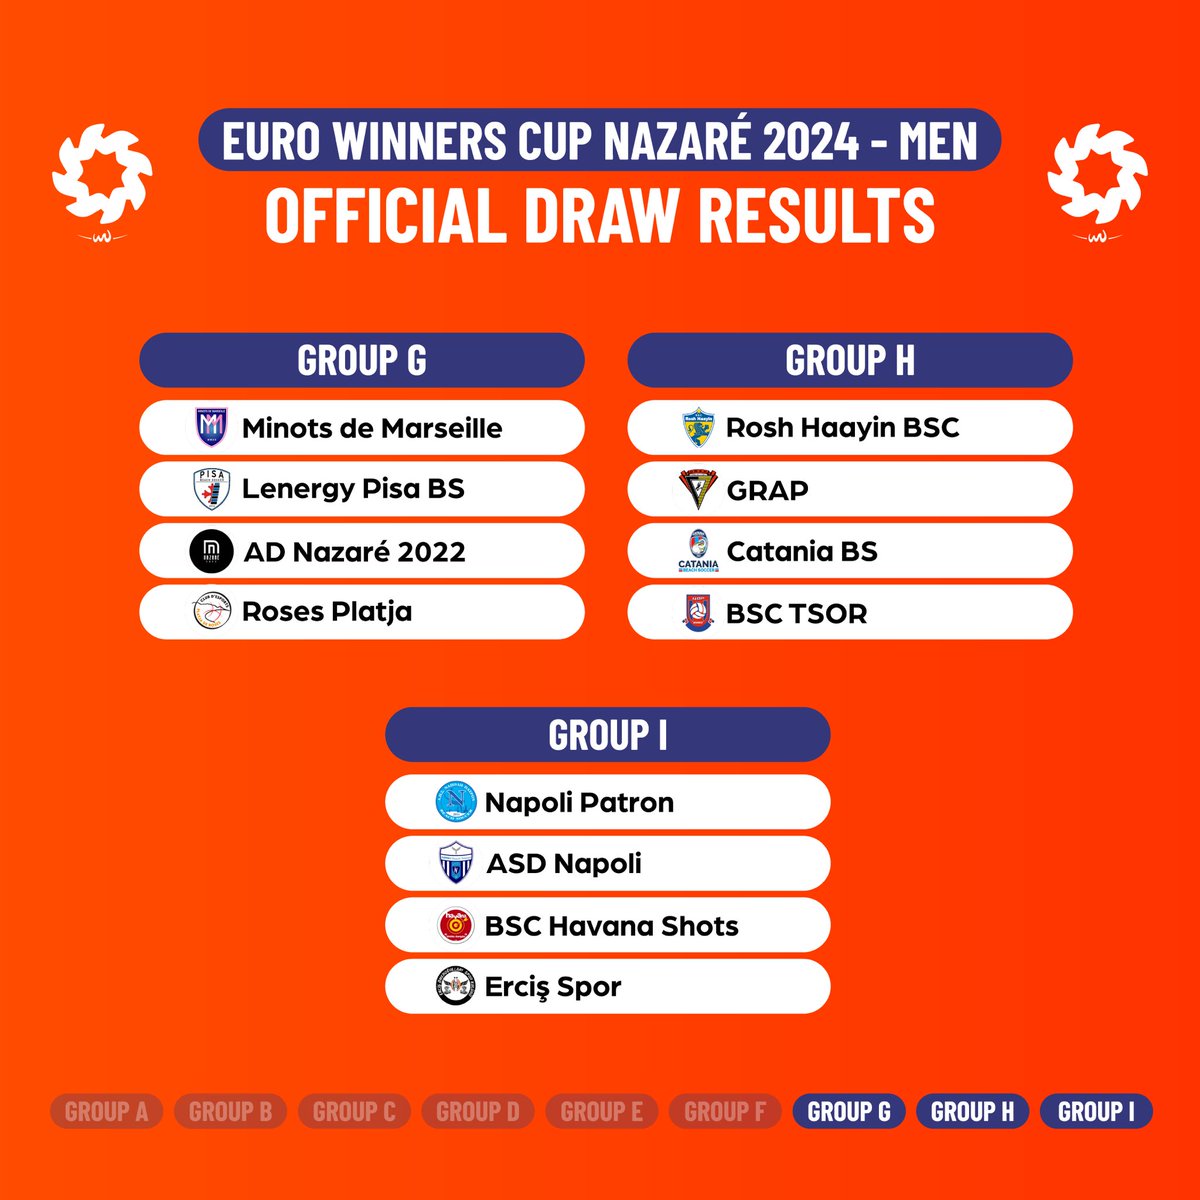 📣 Here are the 𝗢𝗙𝗙𝗜𝗖𝗜𝗔𝗟 𝗚𝗥𝗢𝗨𝗣𝗦 for the Euro Winners Cup Nazaré 2024 🏆 𝗖𝗔𝗧𝗖𝗛 𝗔𝗟𝗟 𝗧𝗛𝗘 𝗔𝗖𝗧𝗜𝗢𝗡 from the Euro Winners Cup 𝗟𝗜𝗩𝗘 𝗙𝗢𝗥 𝗙𝗥𝗘𝗘 on beachsoccertv.com 📺👀 #BeachSoccer #EWC2024 #Nazaré